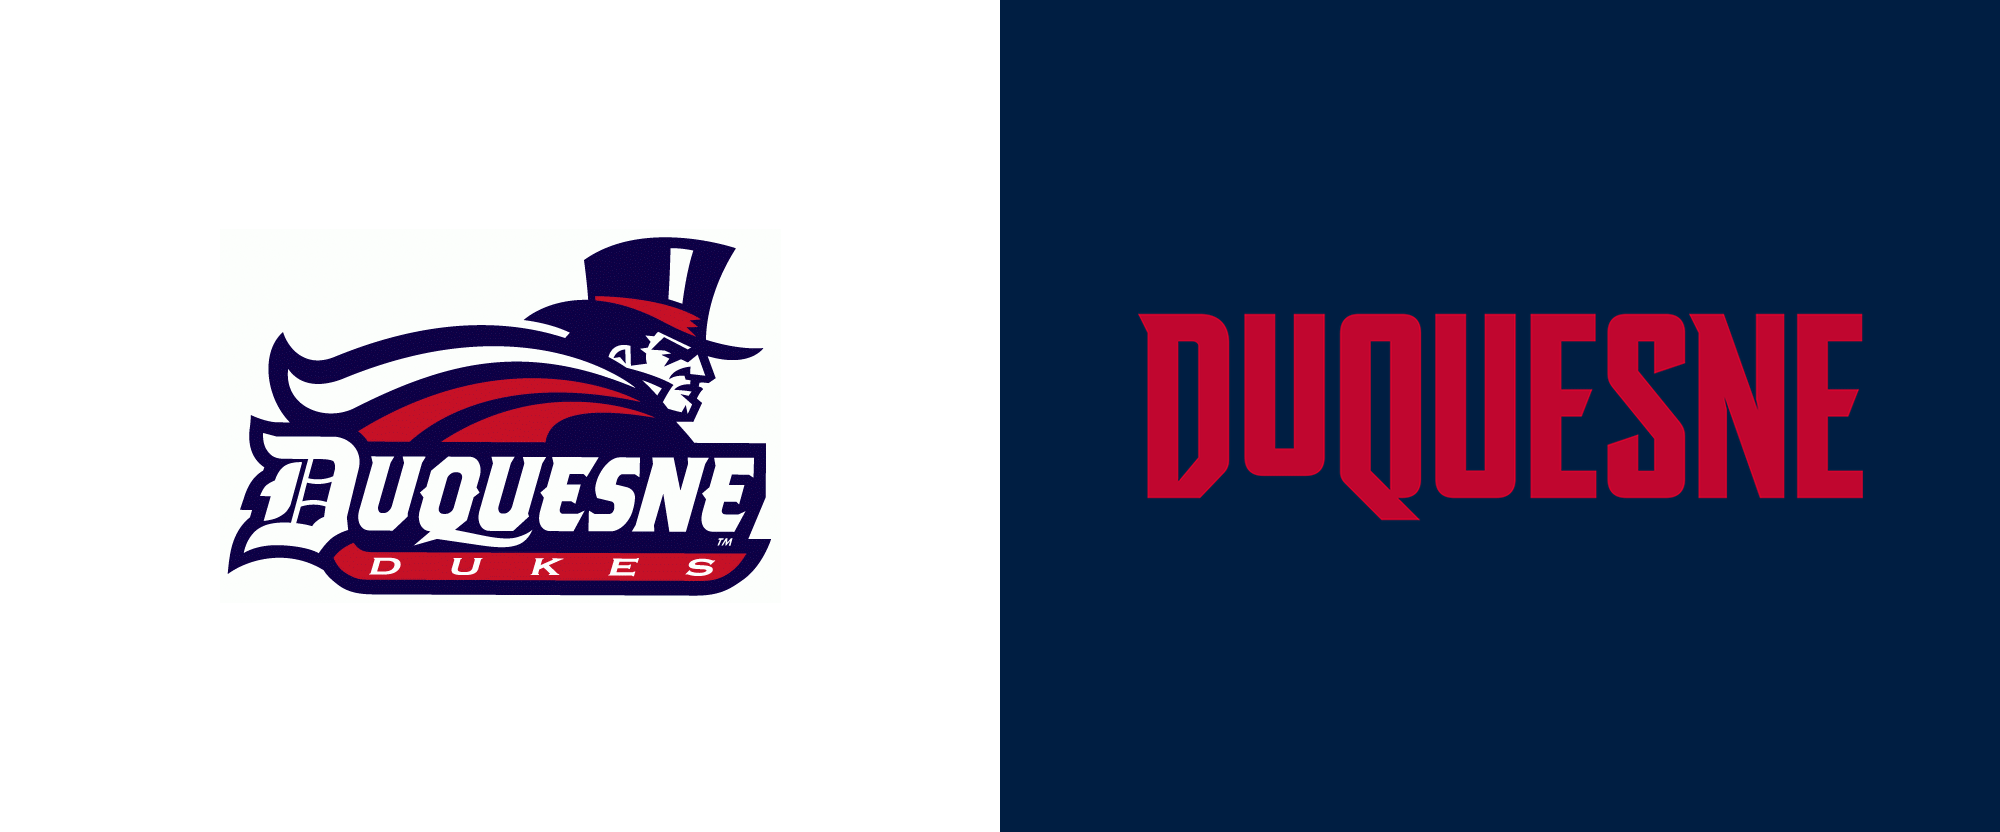 Duquesne Logo - Brand New: New Logo and Identity for Duquesne University Athletics ...